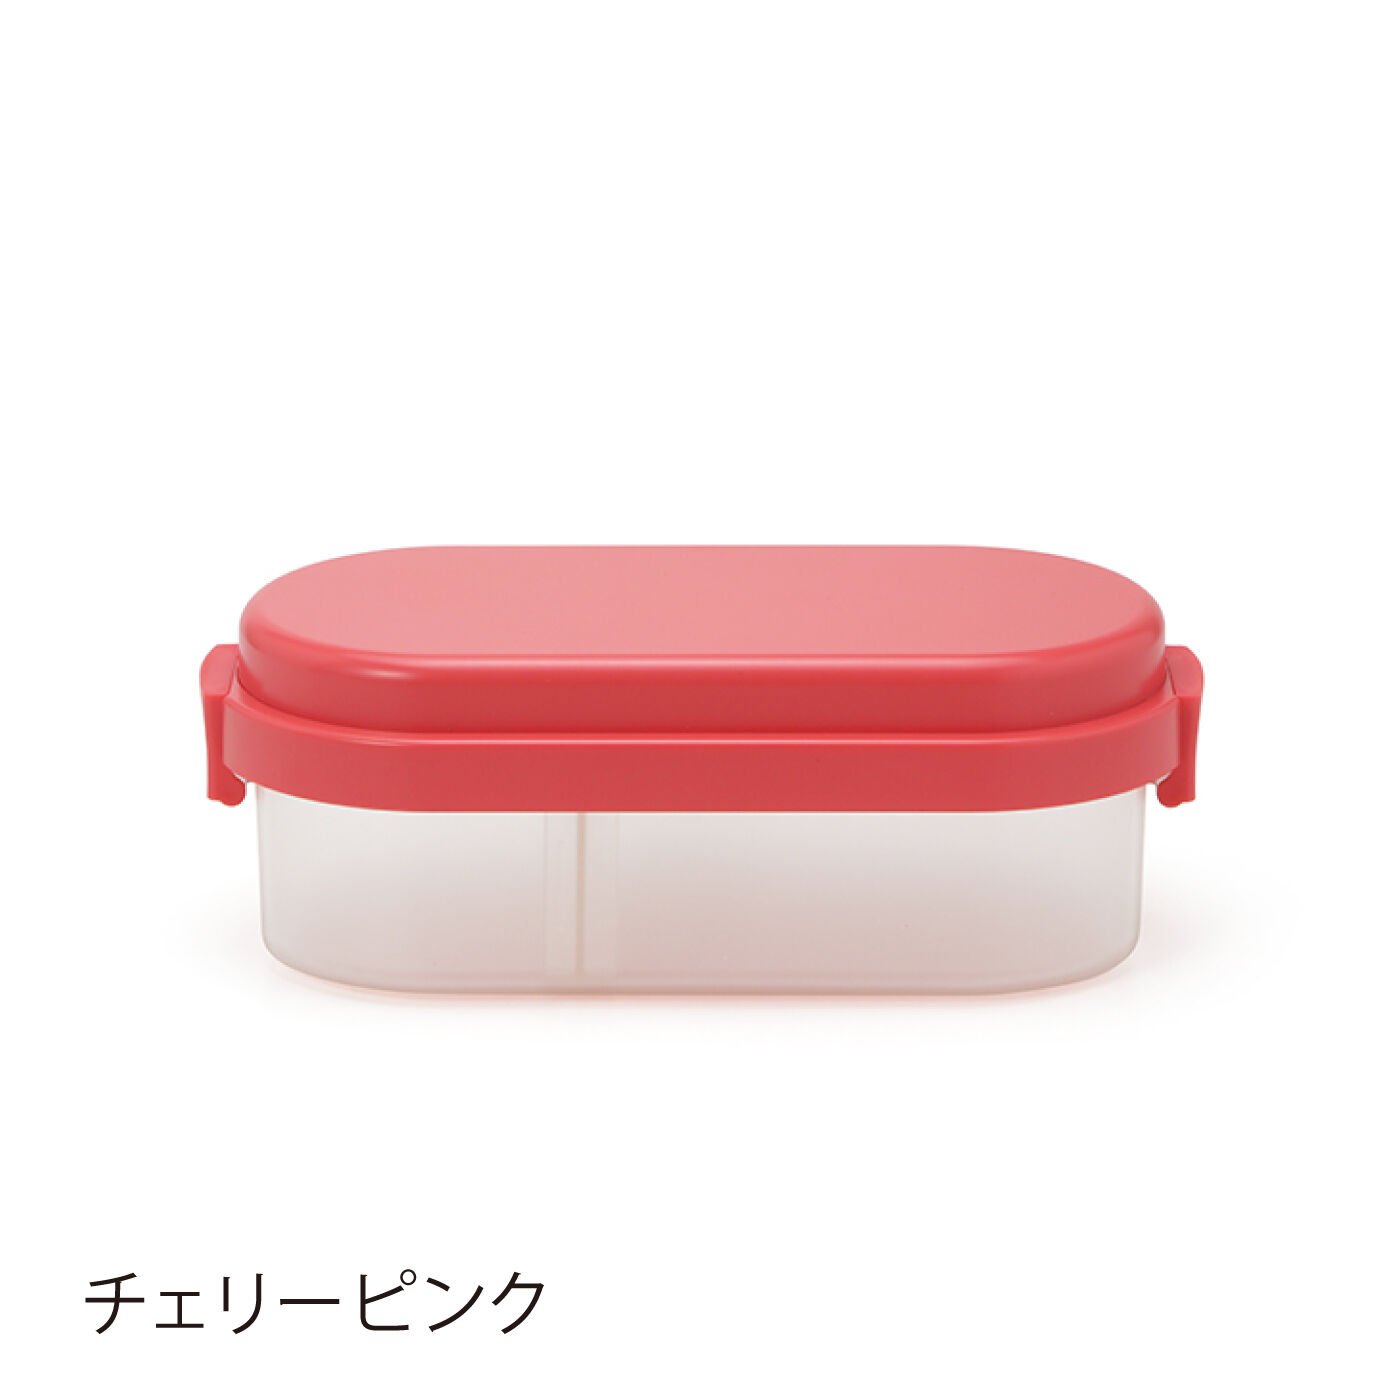 FELISSIMO PARTNERS|GEL-COOL plus dome Mサイズ CLEAR LUNCH BOX